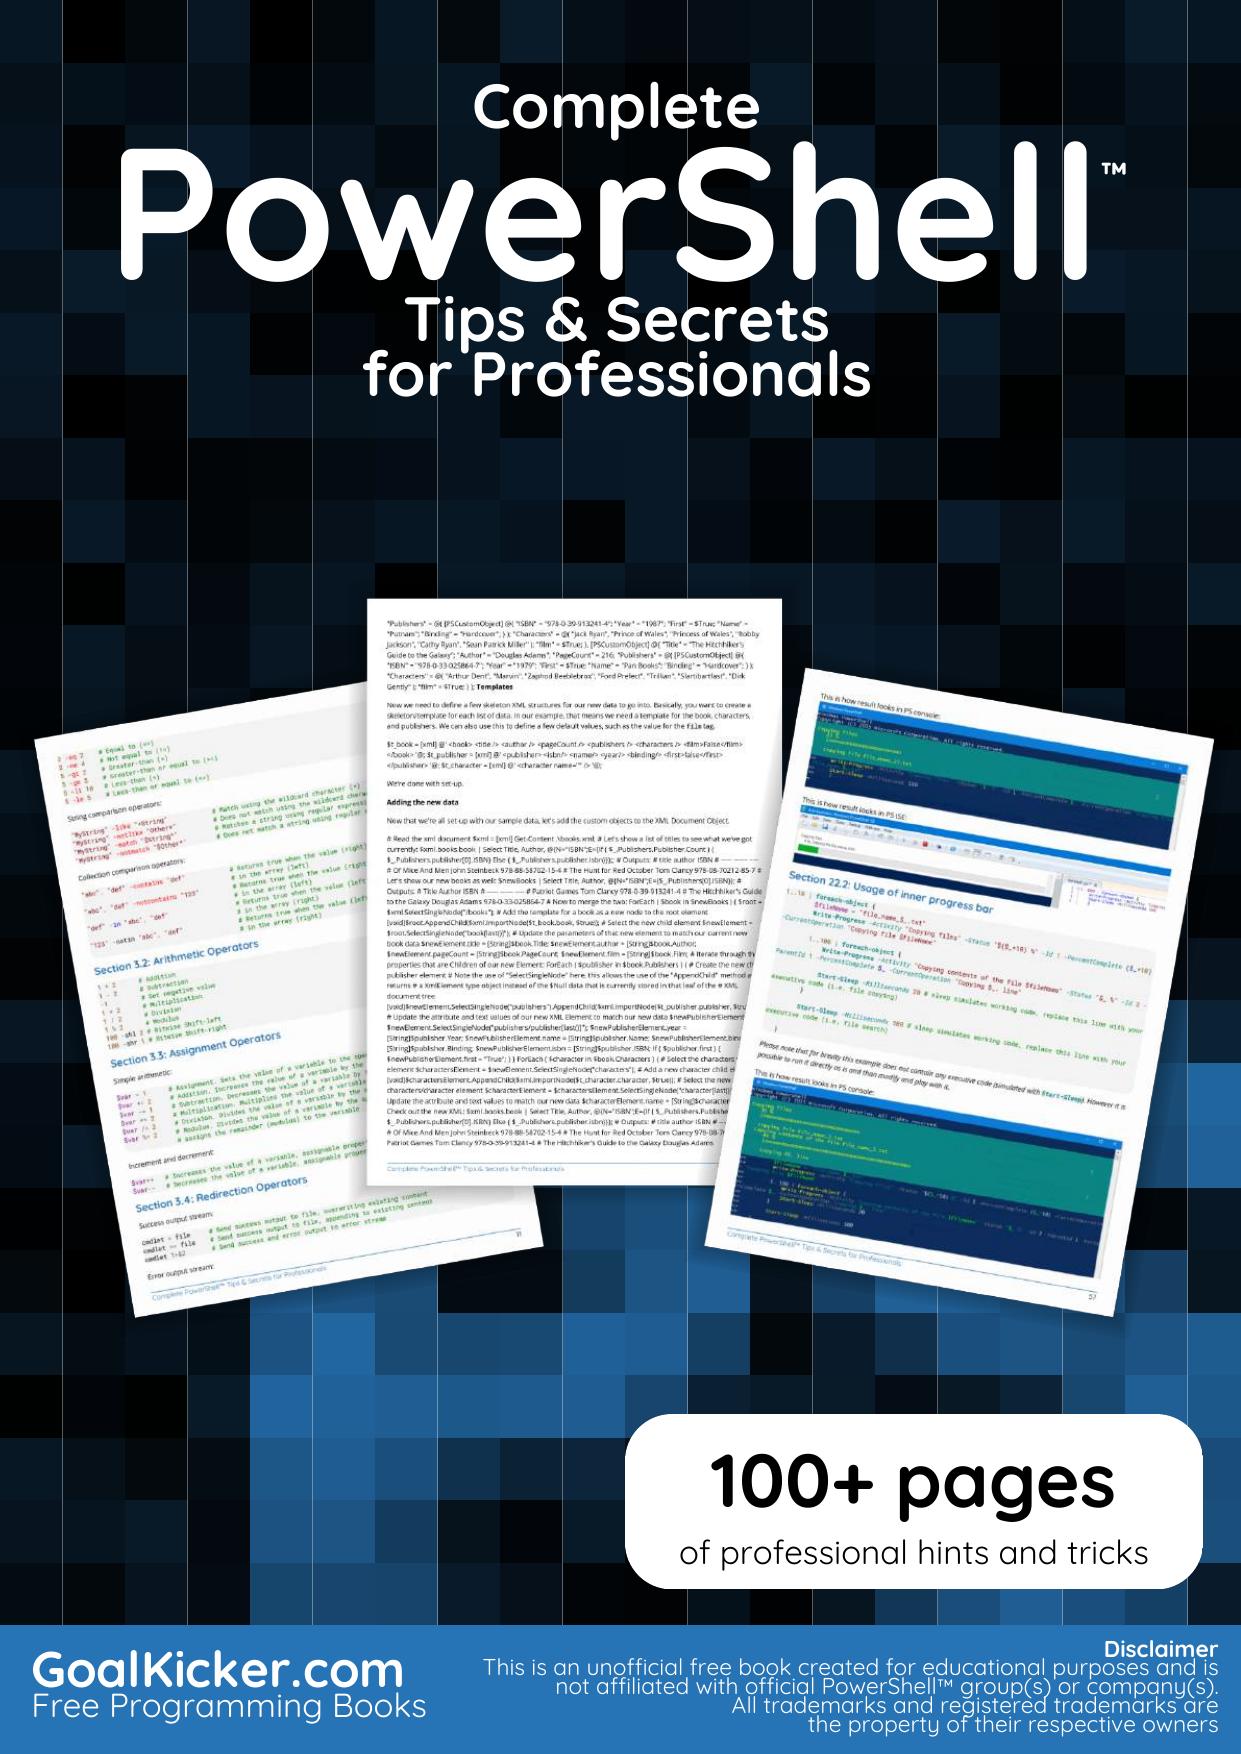 Complete PowerShell Secrets & Tips for Professionals